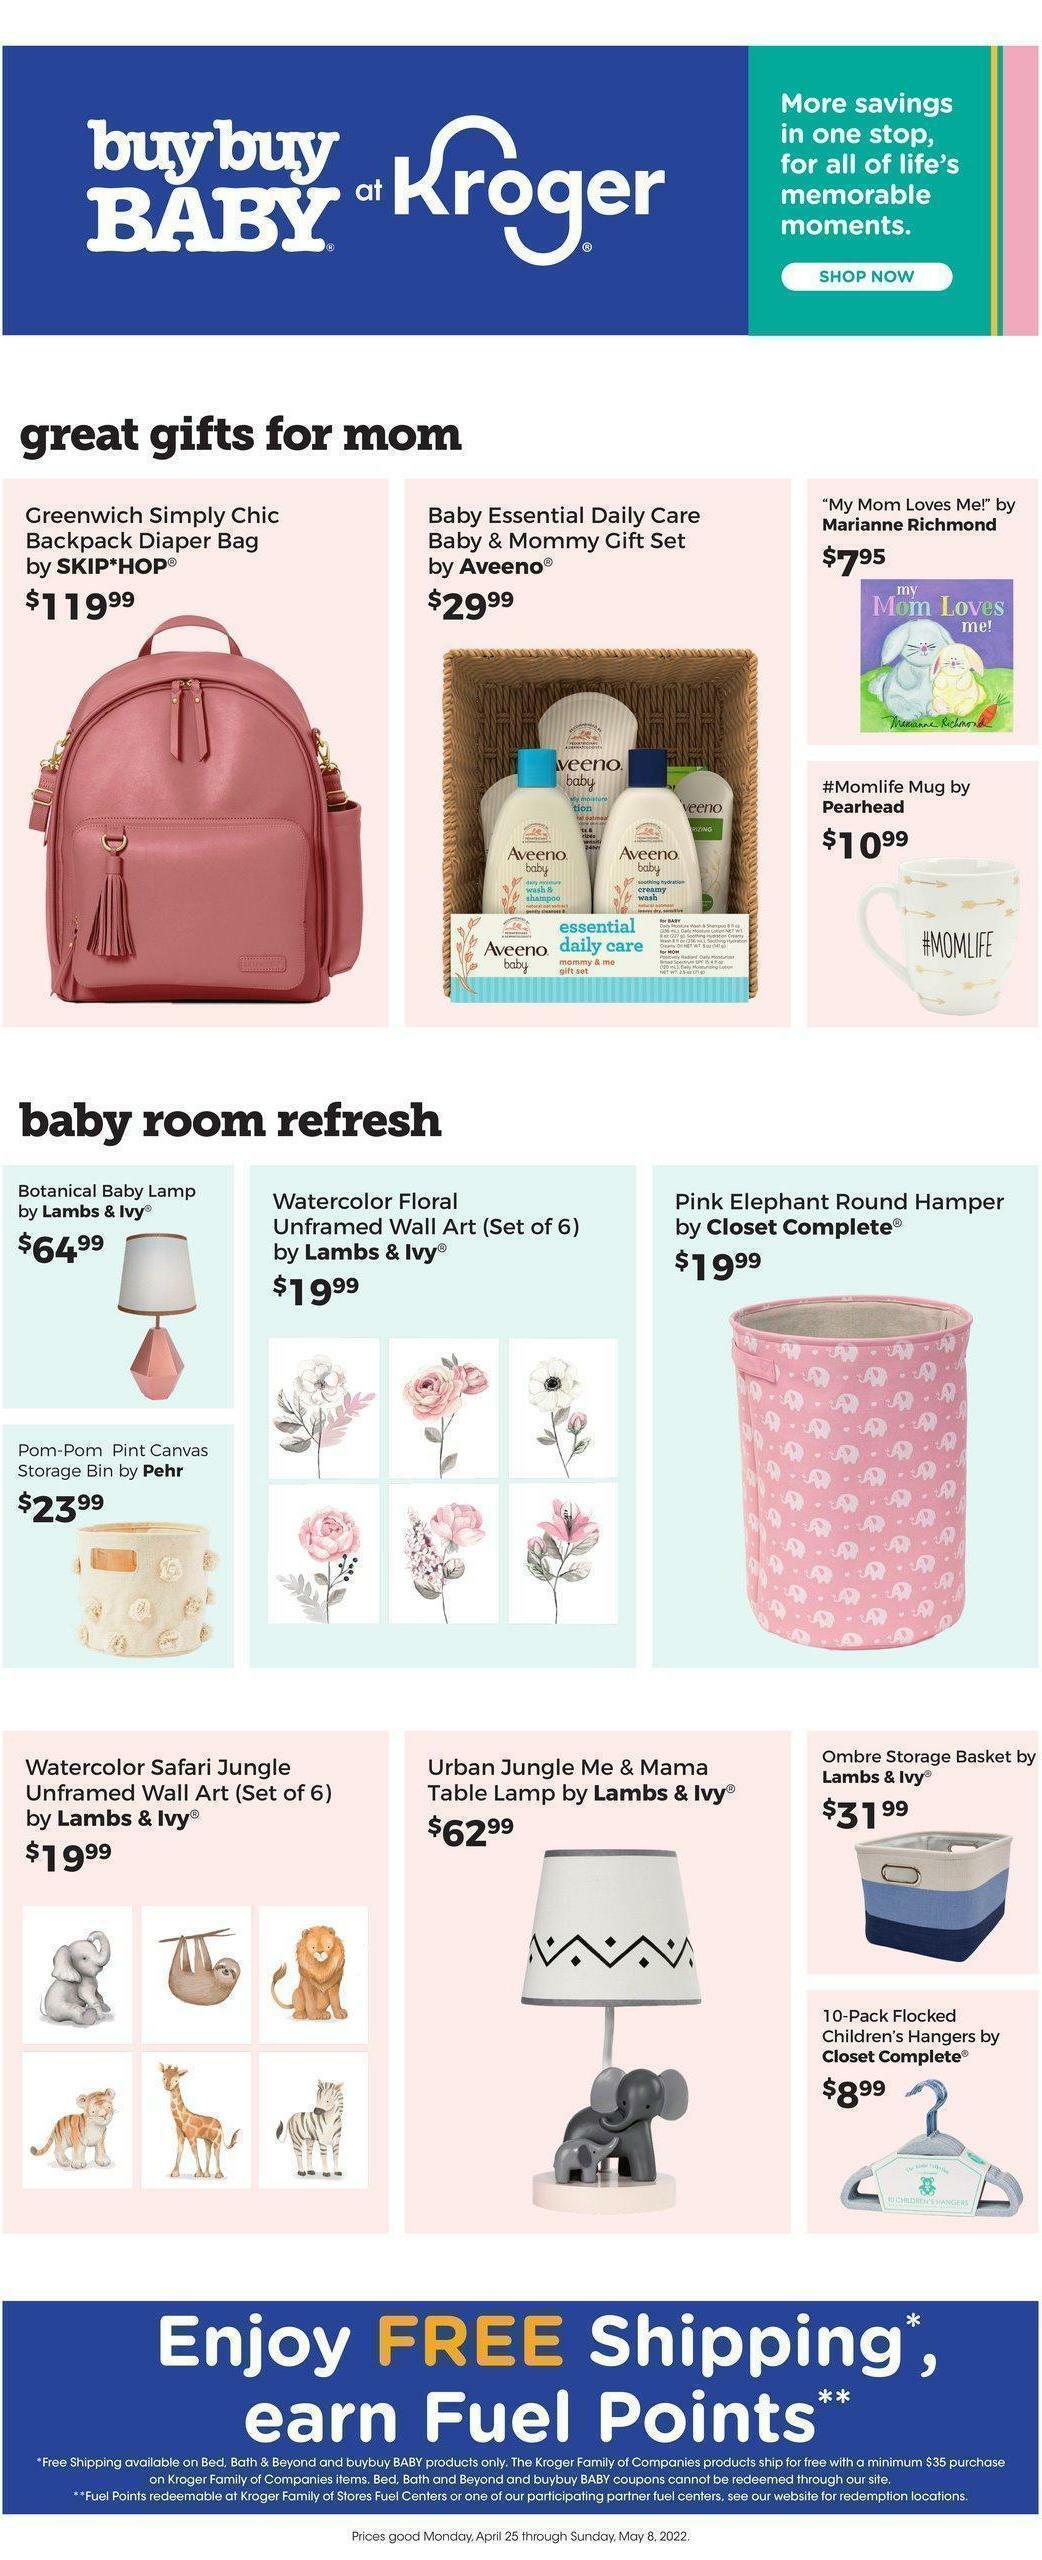 Kroger Bed, Bath & Beyond Weekly Ad from April 25